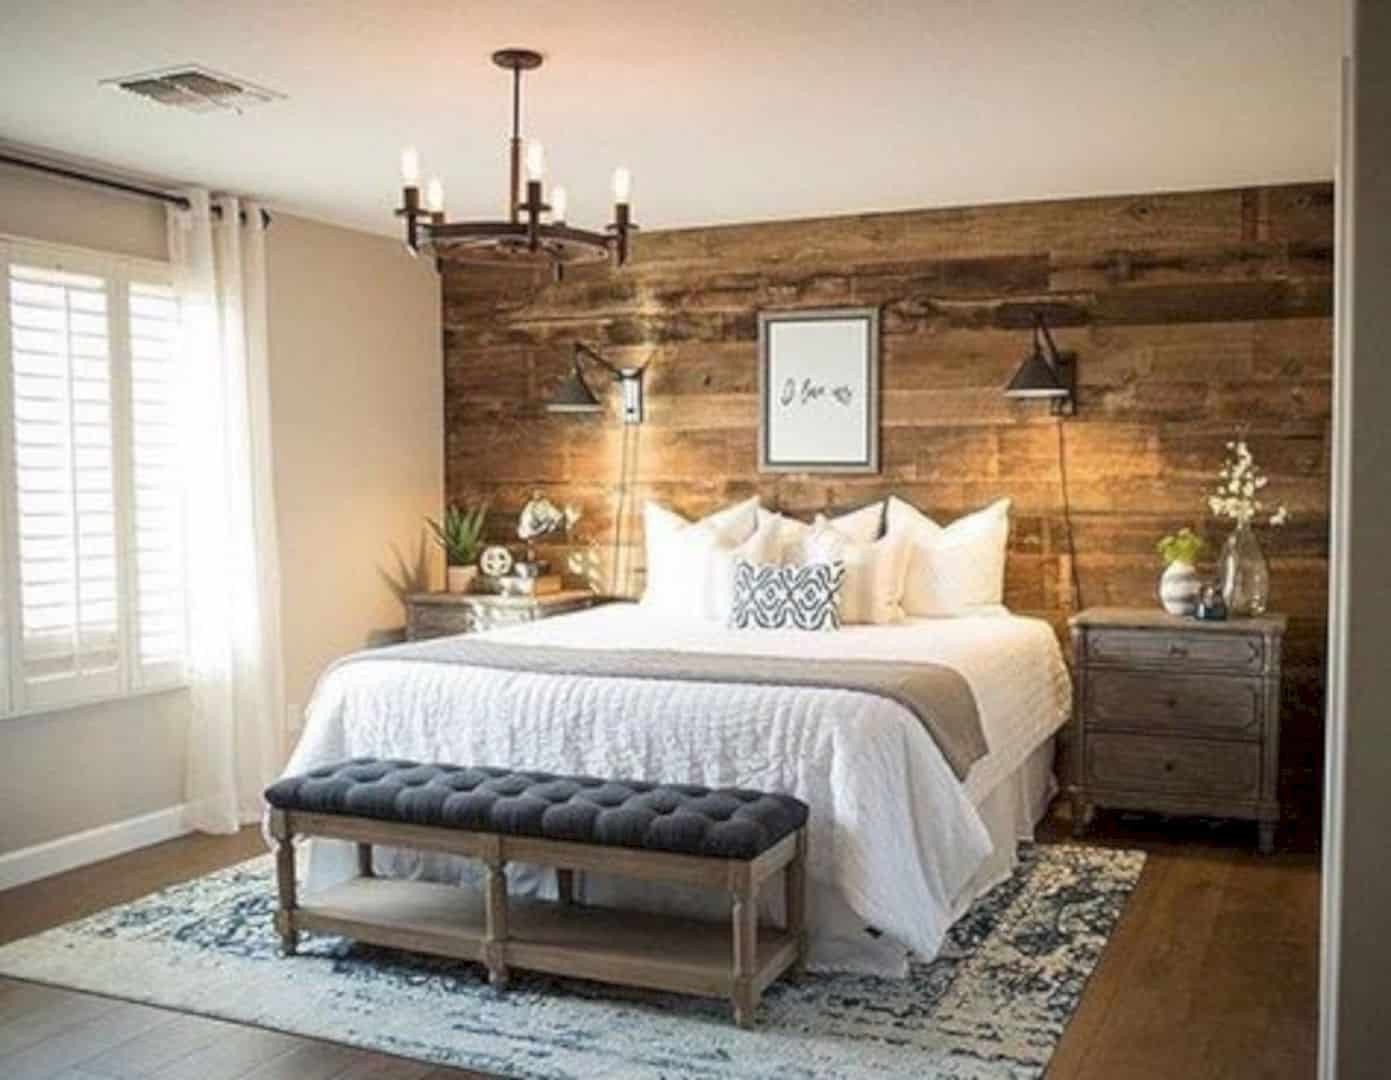 Rustic Bedroom Wall Art
 DIY Rustic Wall Décor Ideas for a Countryside themed Room